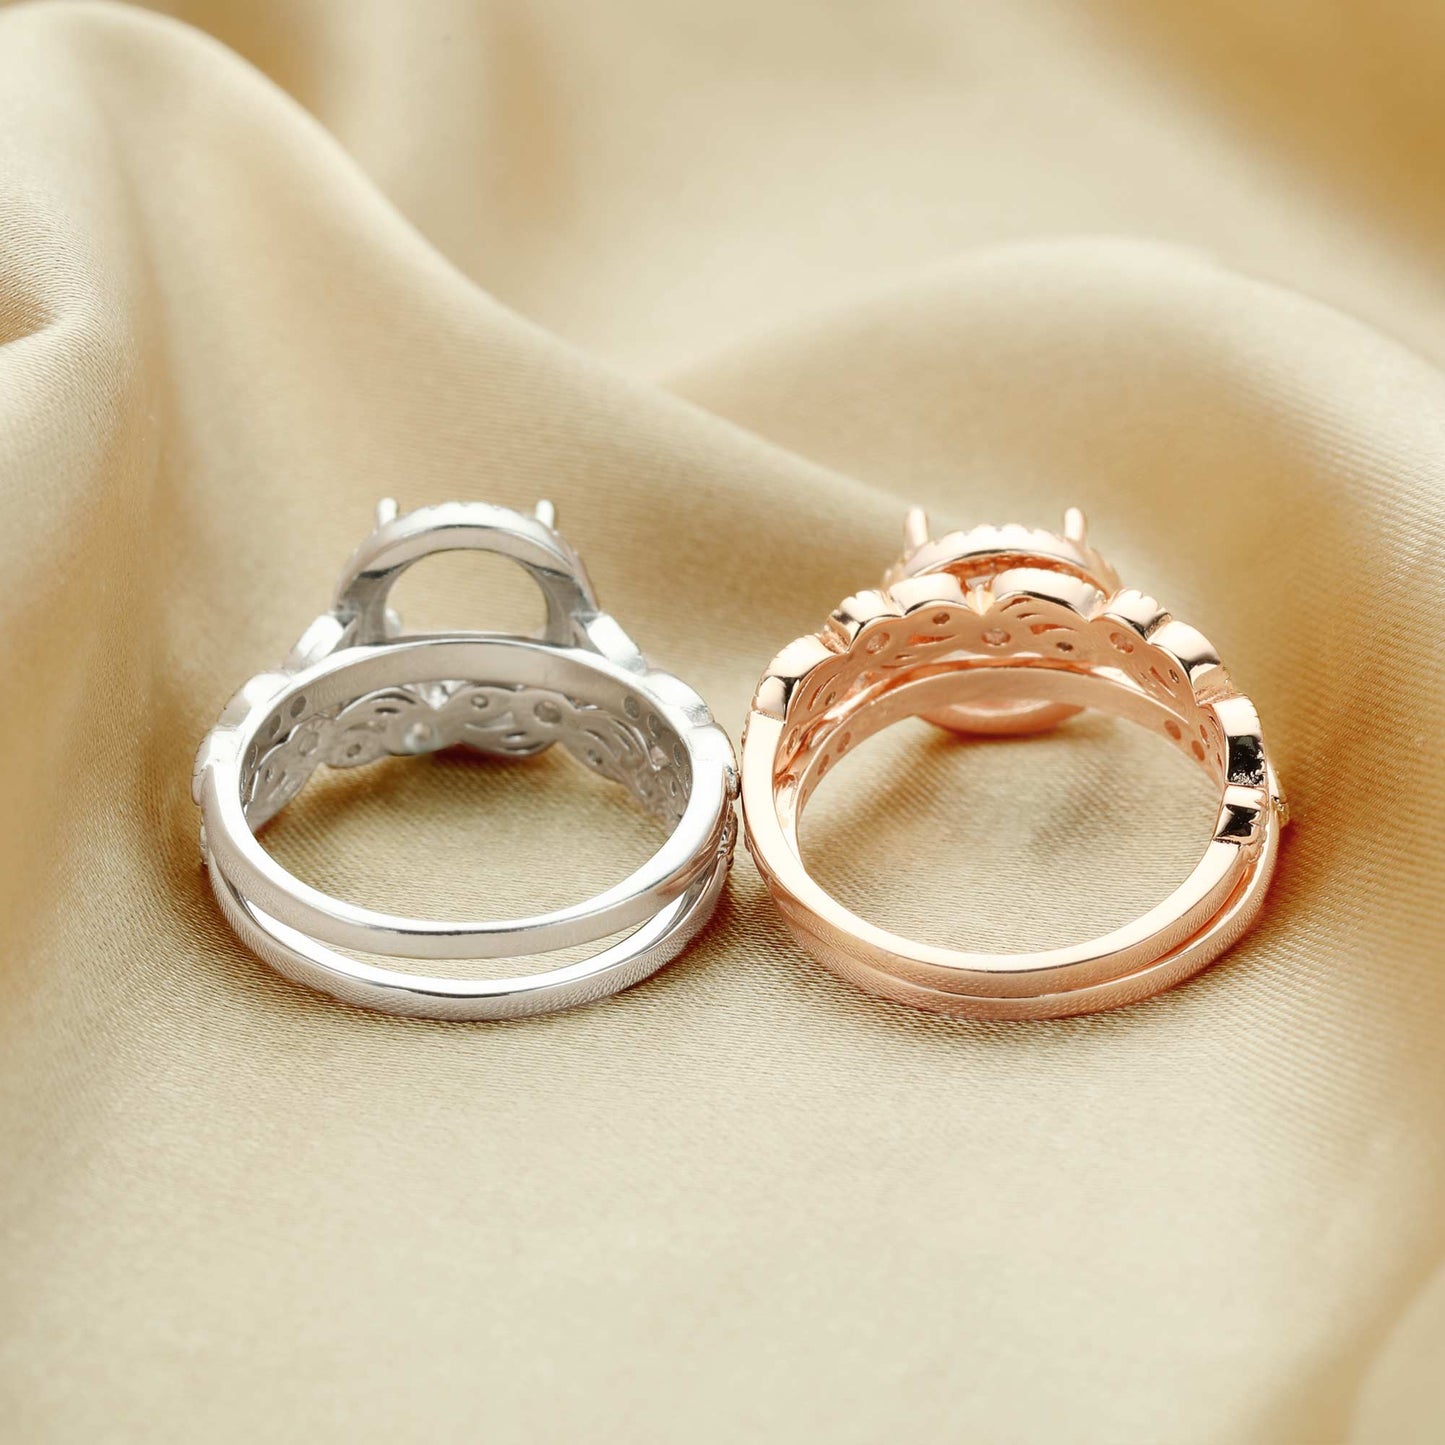 One silver and one rose gold art deco style halo semi mount with a filigree wave and gem studded design wedding bands.